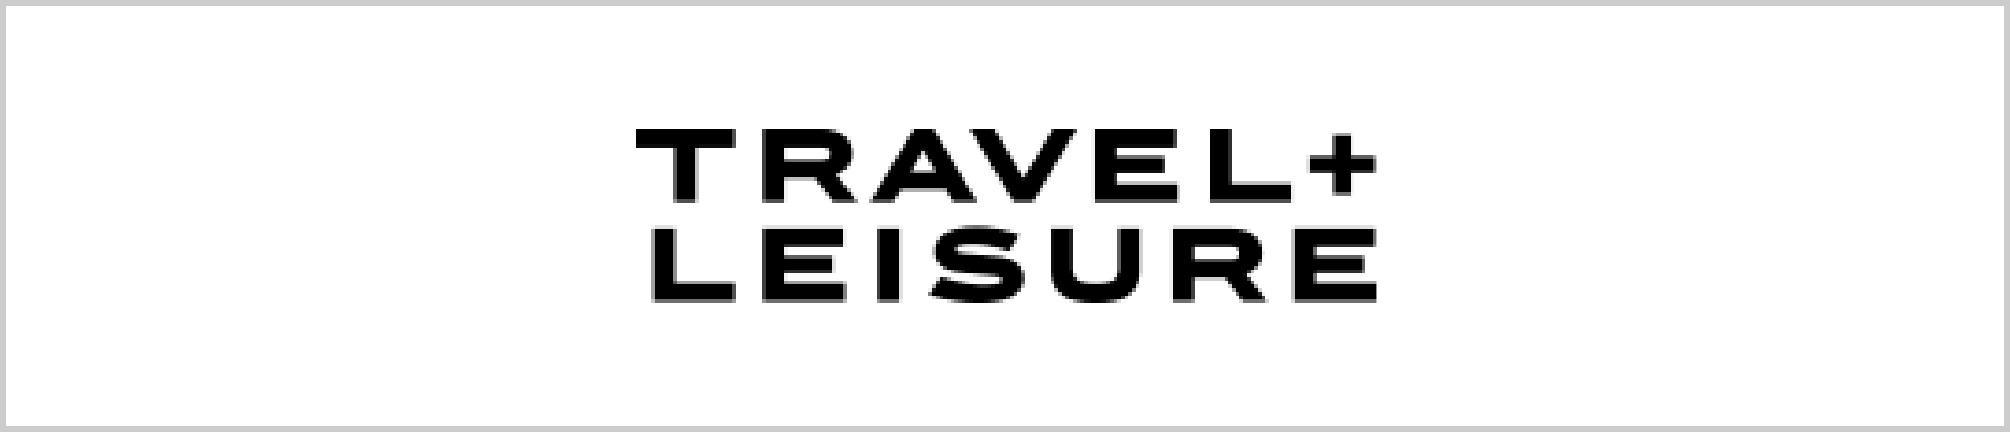 travelleisure banner(open in other tab)